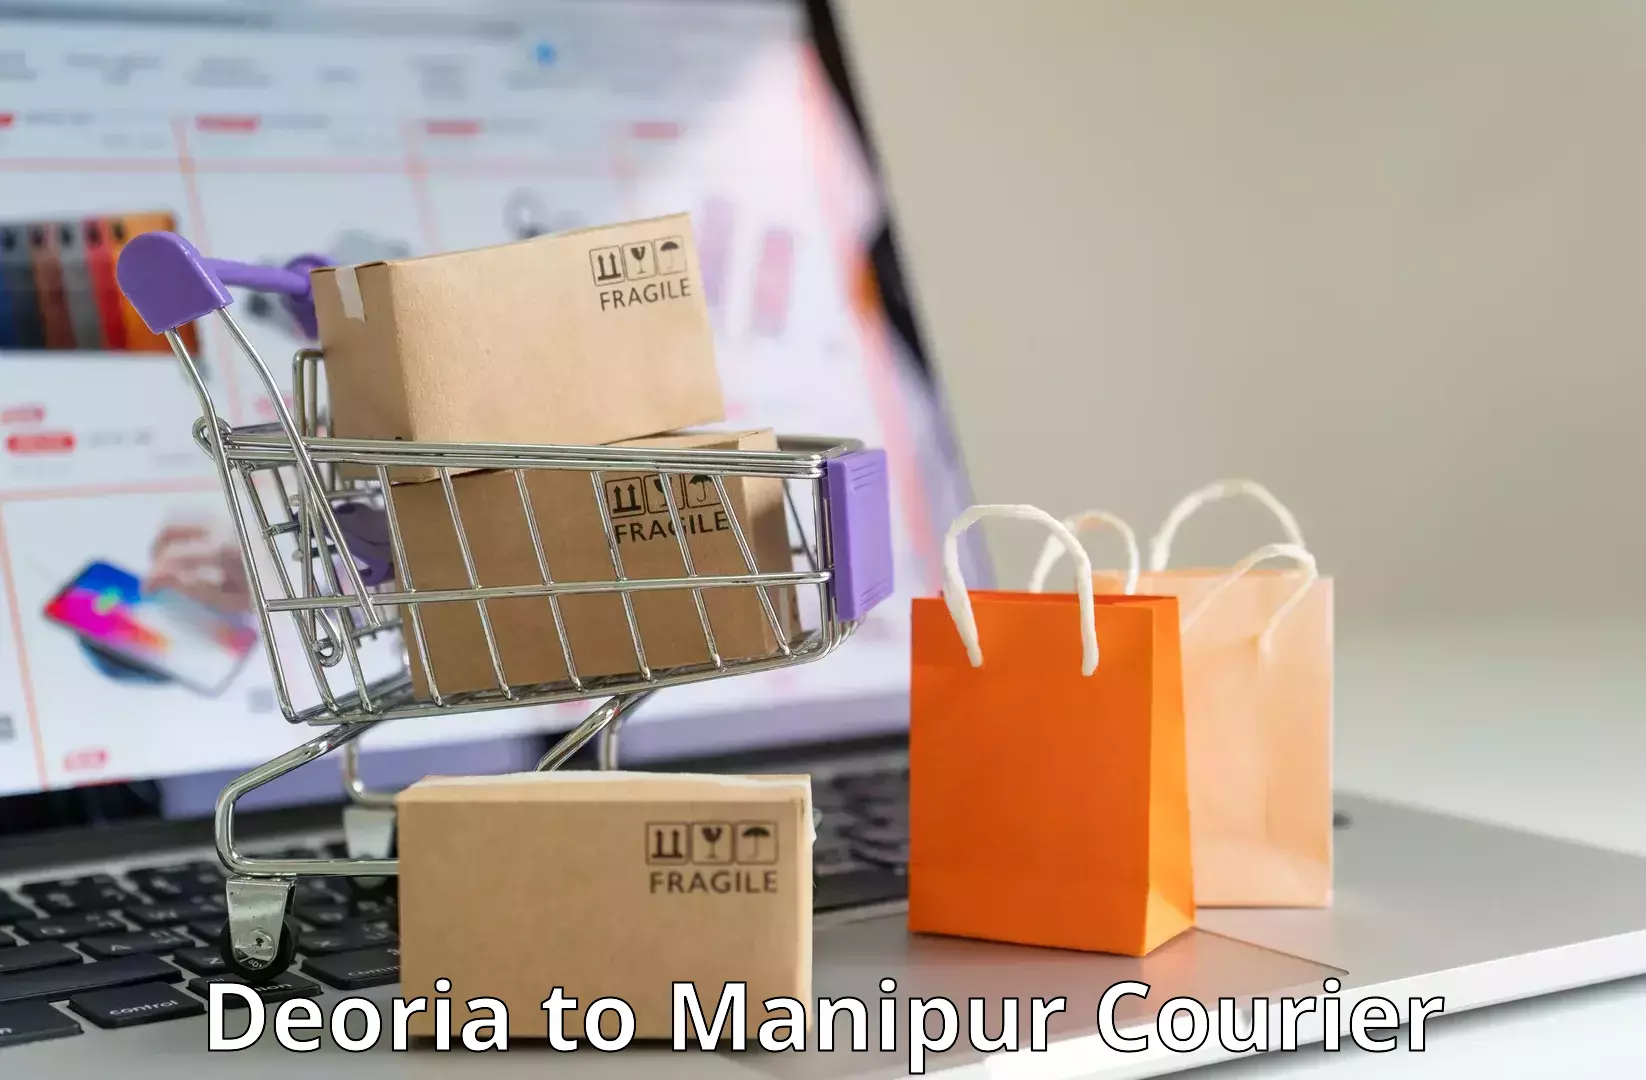 Full-service courier options in Deoria to Jiribam